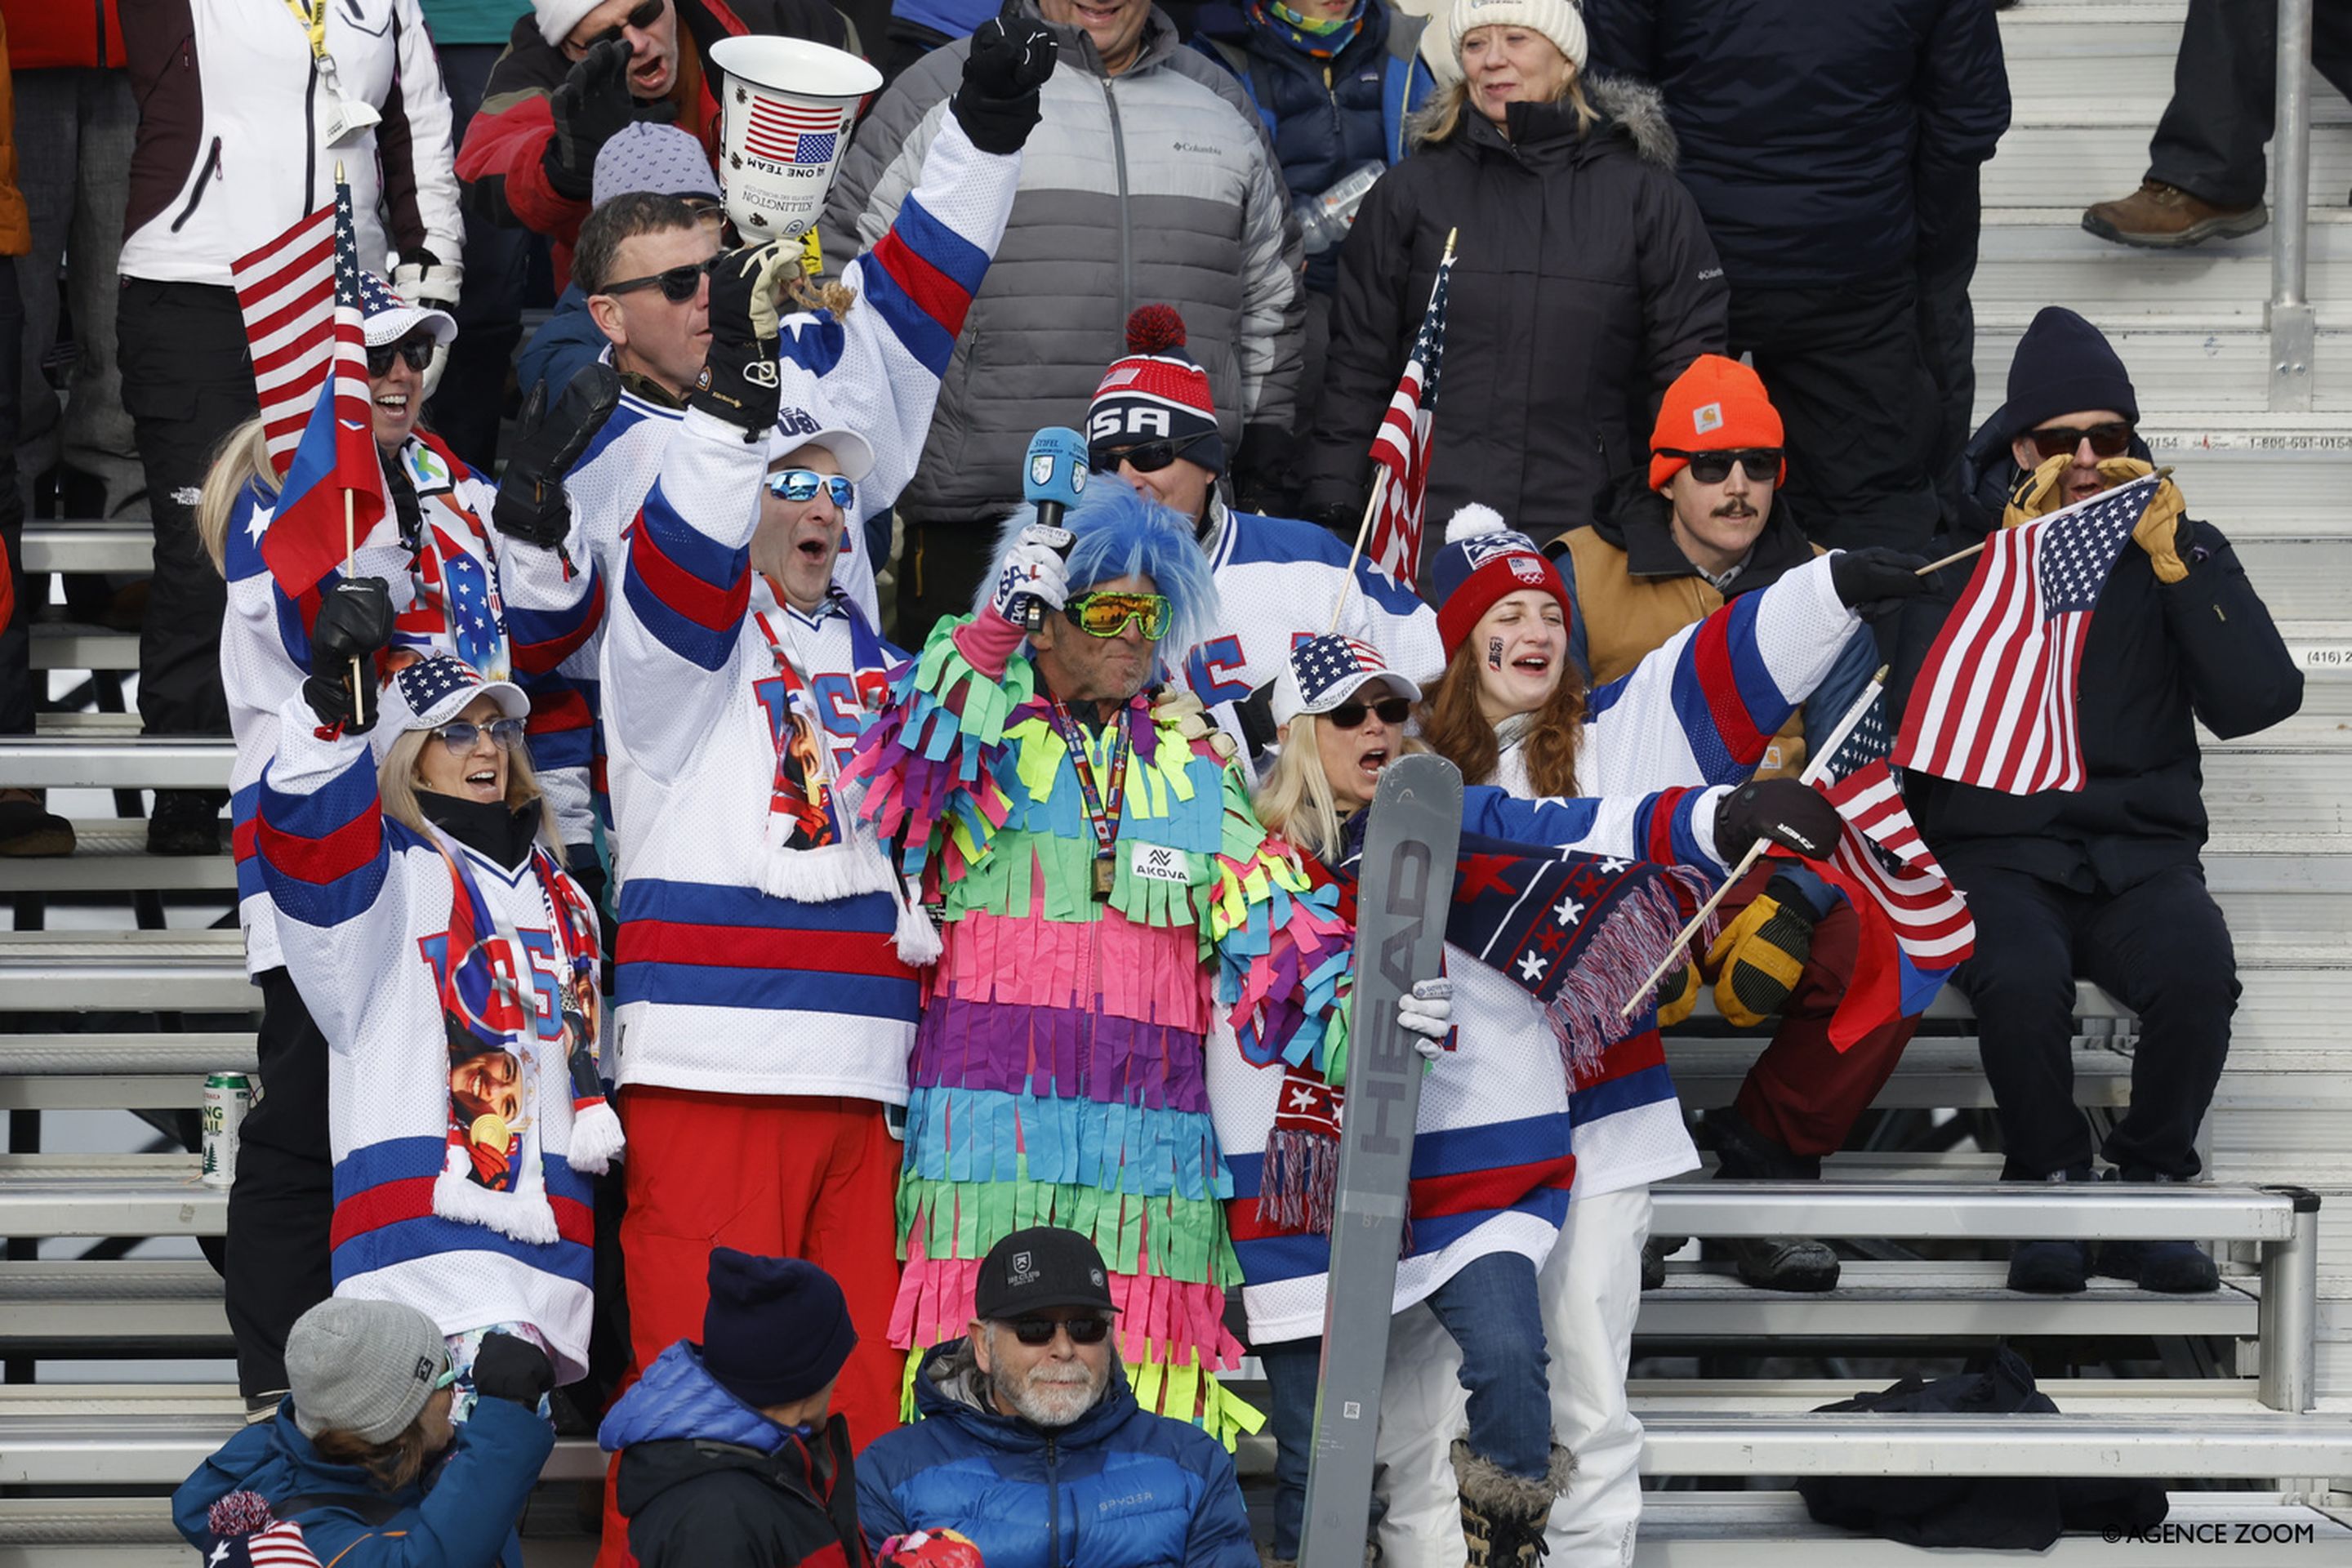 Fans cheering for Mikaela Shiffrin and other USA skiers in Killington on Sunday